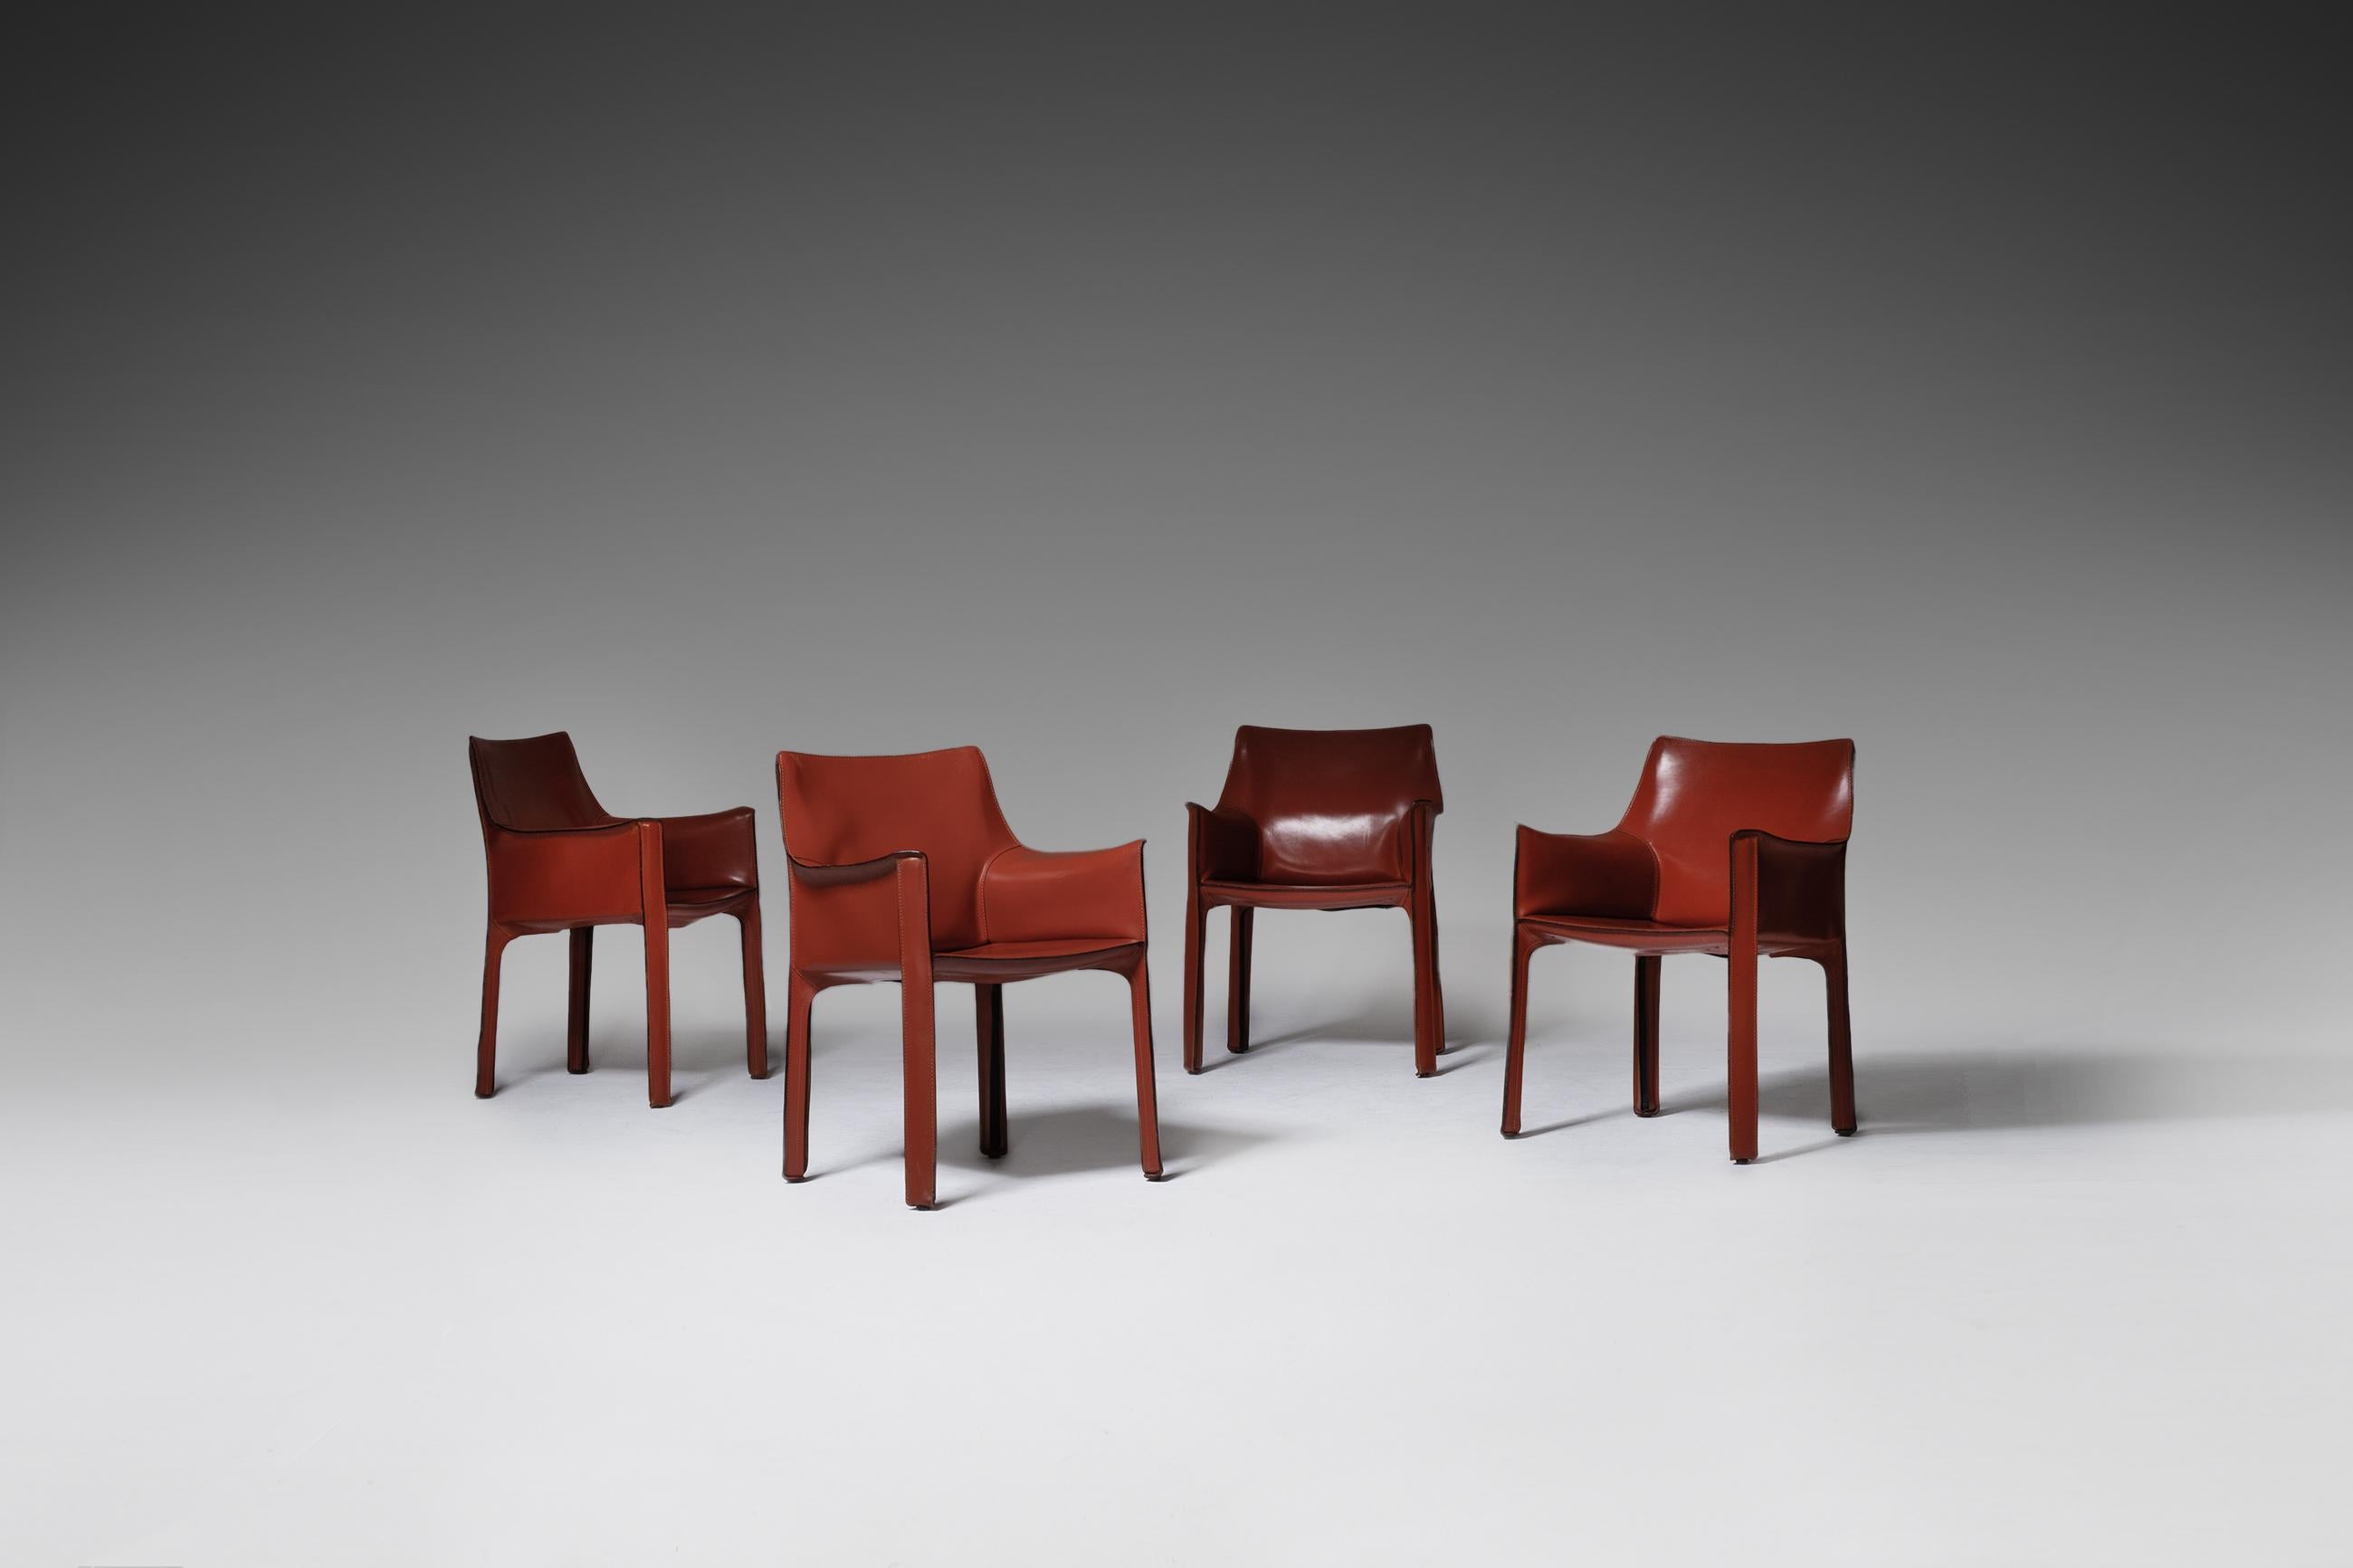 Set of four “413 - Cab Armchairs” by Mario Bellino for Cassina, Italy 1977. The chair consist a steel frame which is completely wrapped by high-quality natural cognac / red coloured leather, resulting in these icon and extremely comfortable chairs.